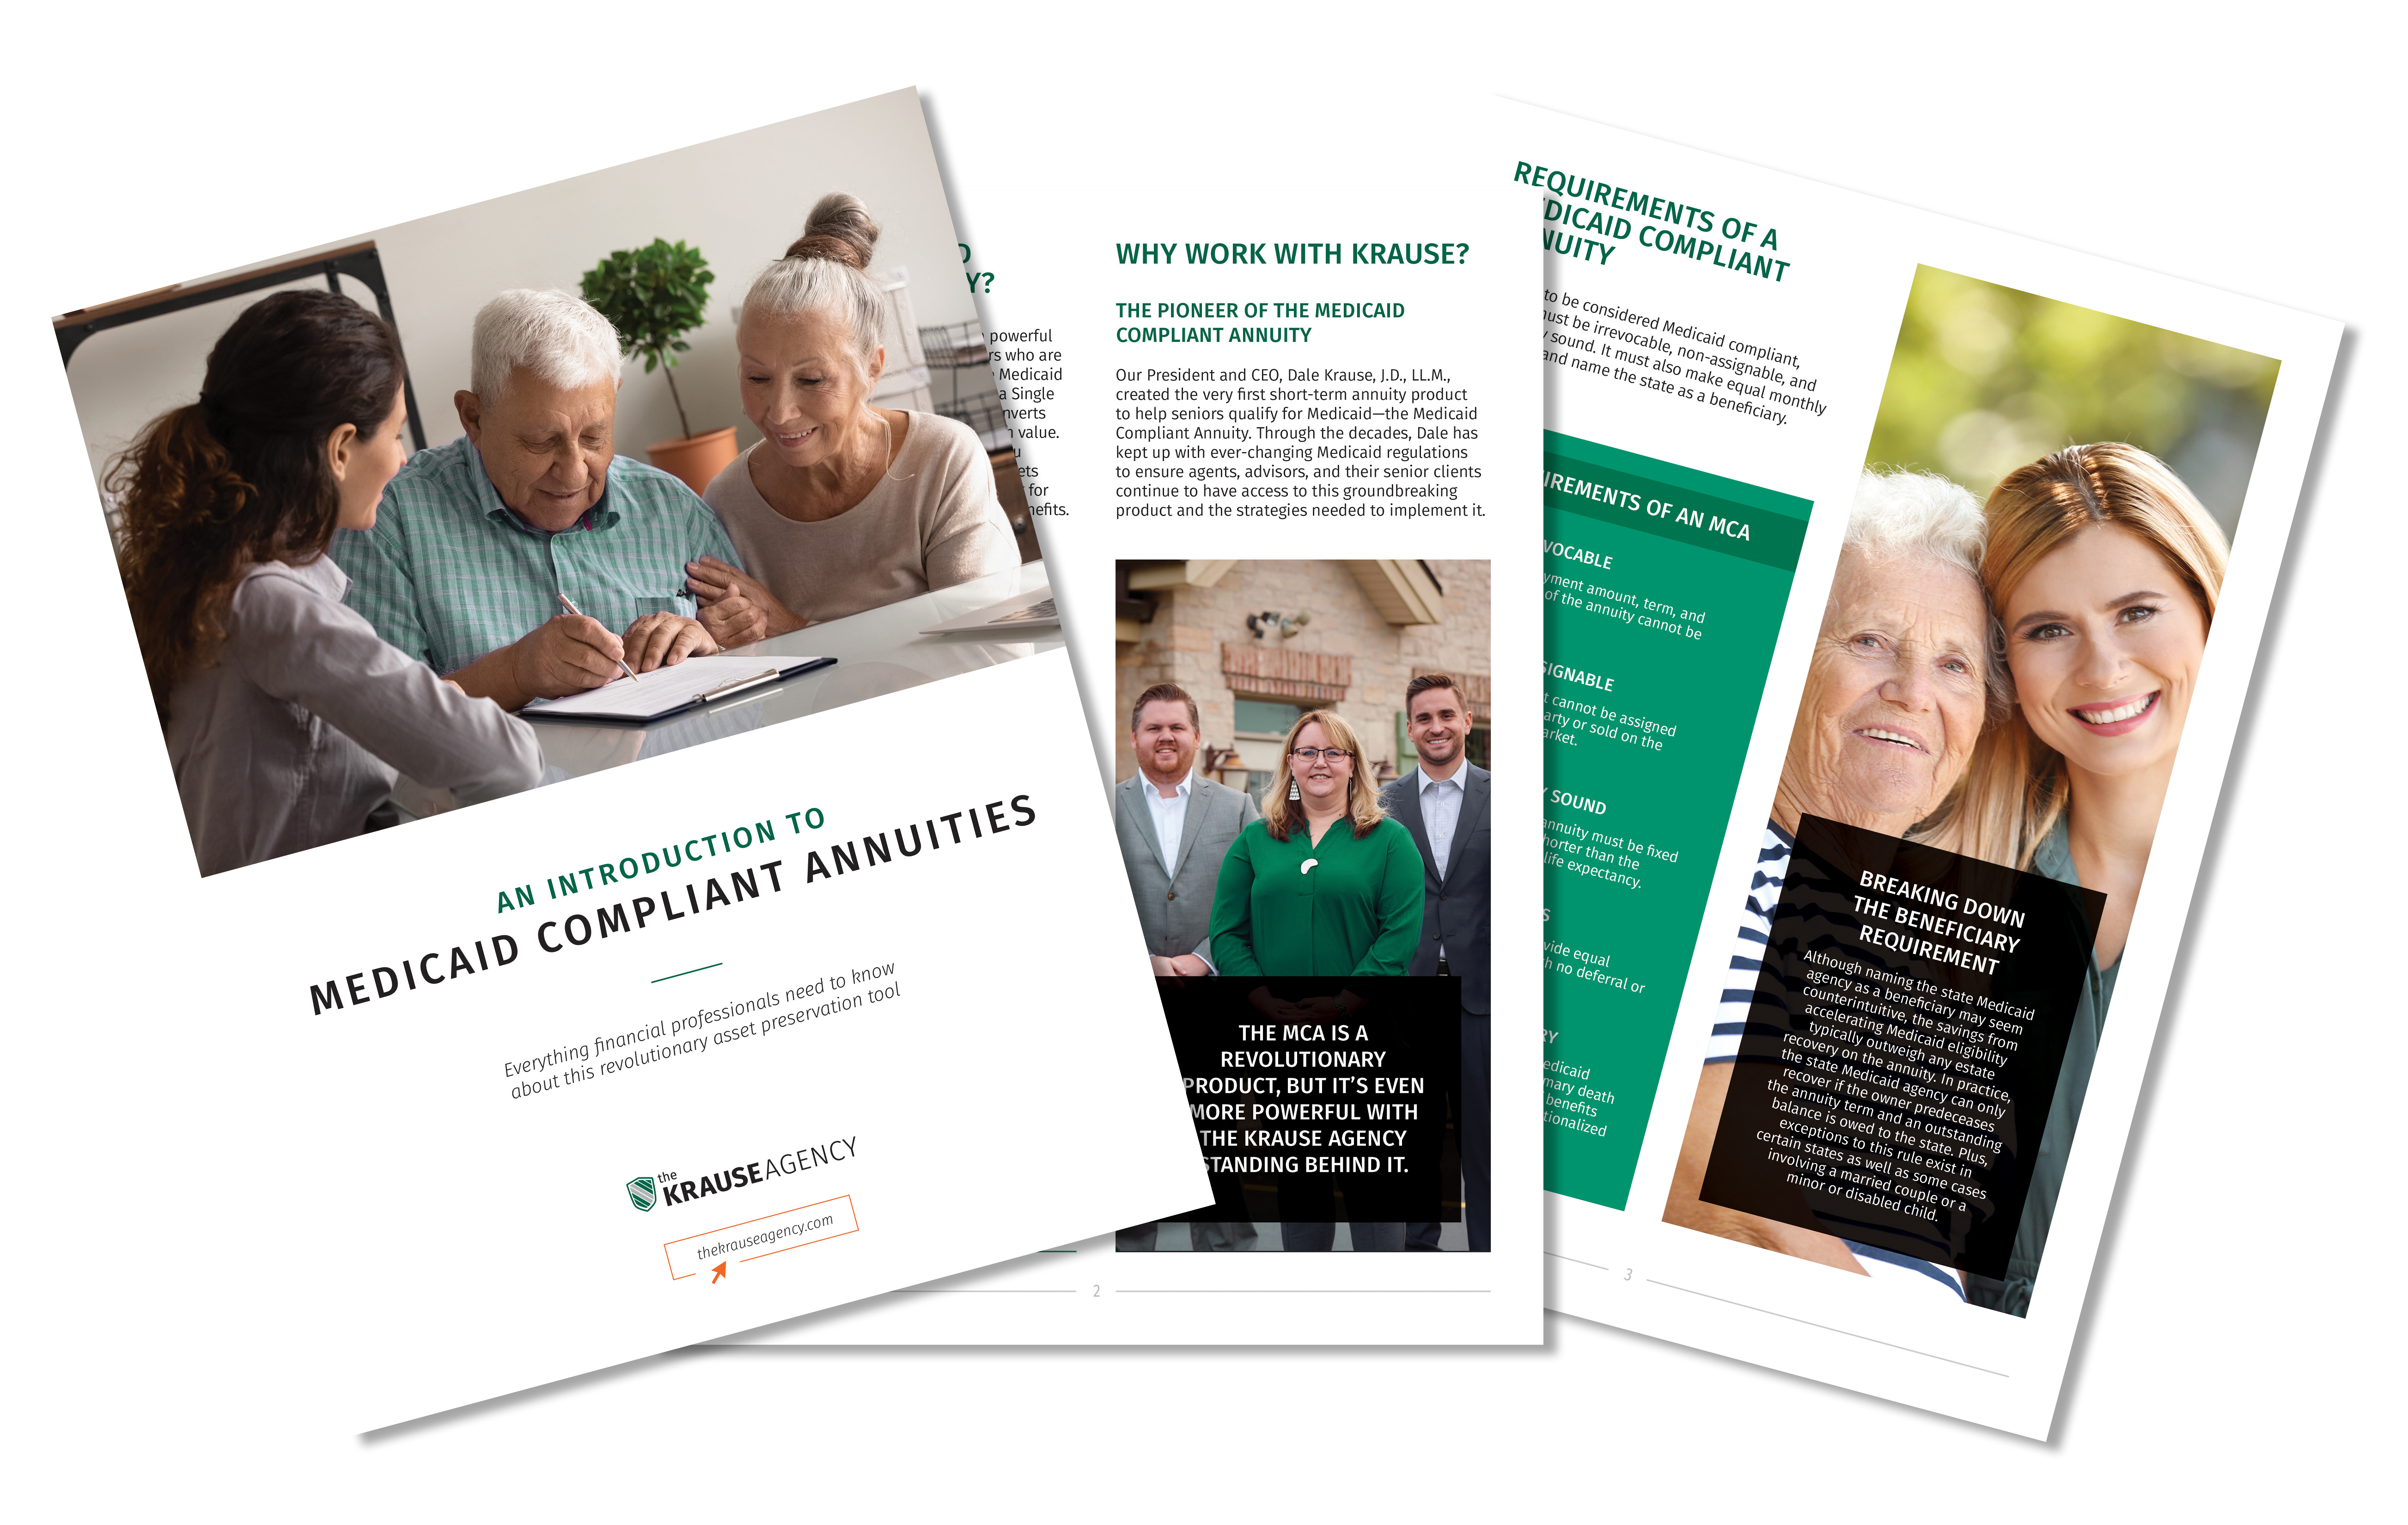 Your Comprehensive Introduction to Medicaid Compliant Annuities